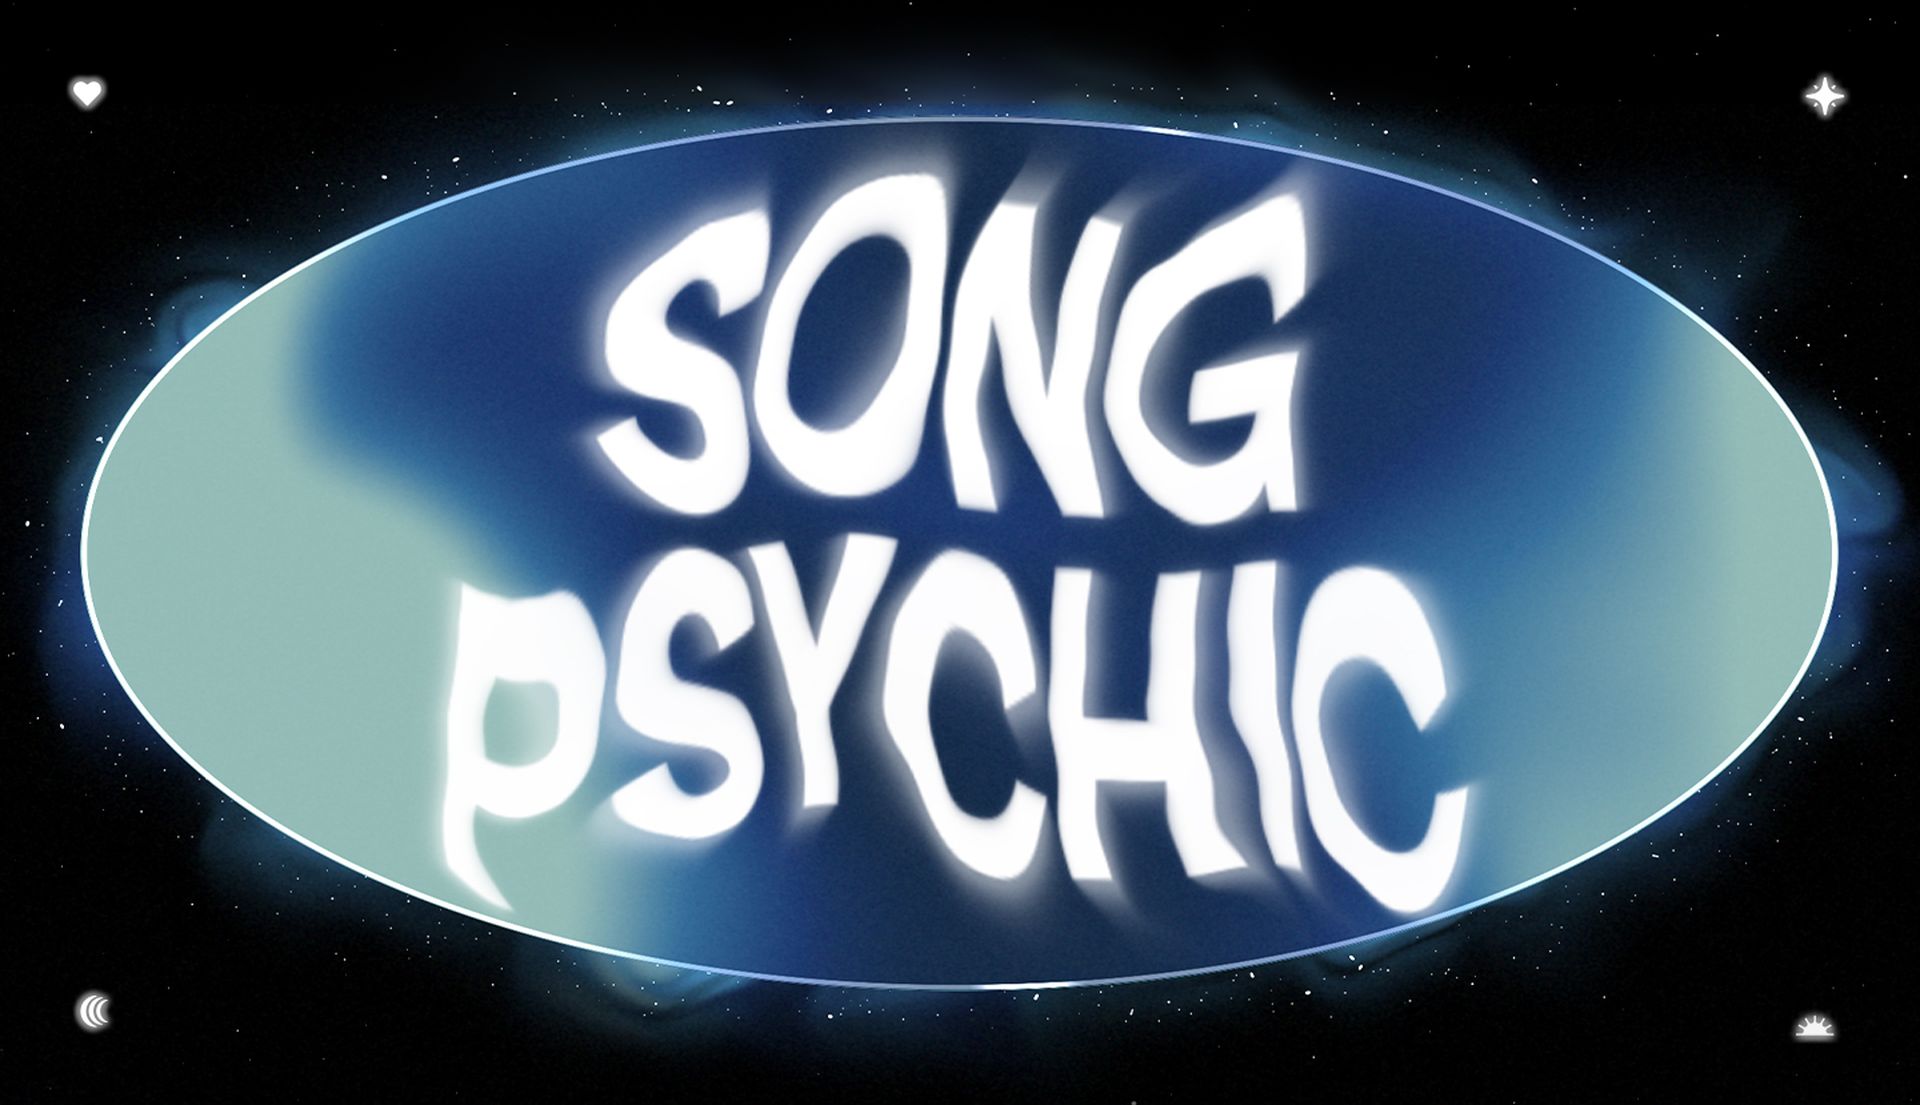 Spotify’s Song Psychic can be your new fortuneteller